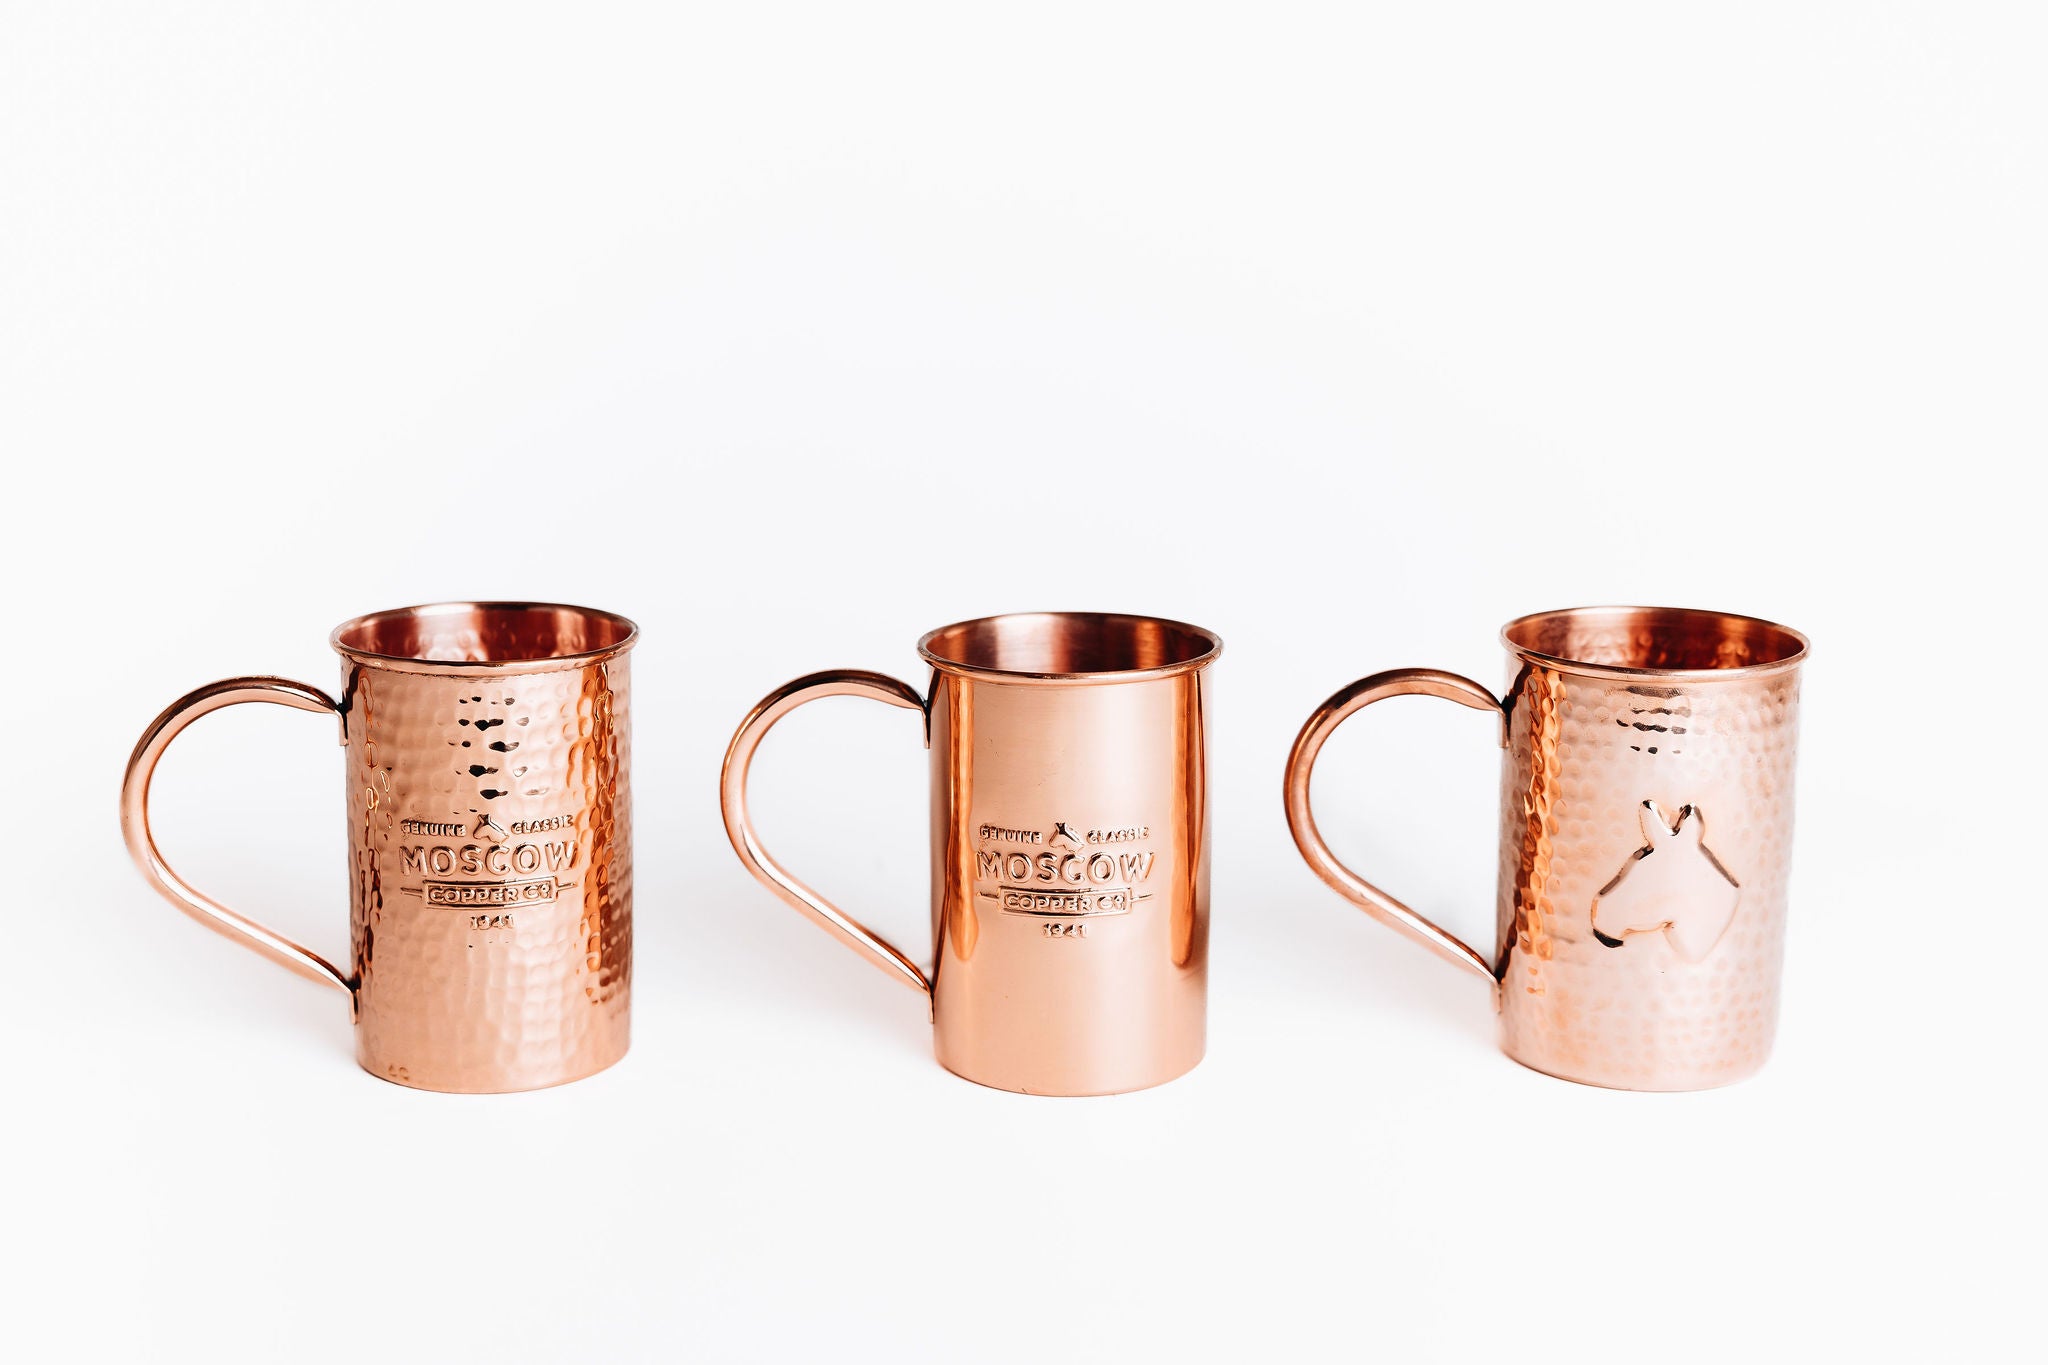 Two Moscow Mule Mugs with Collectors Box | Moscow Copper Mulehead